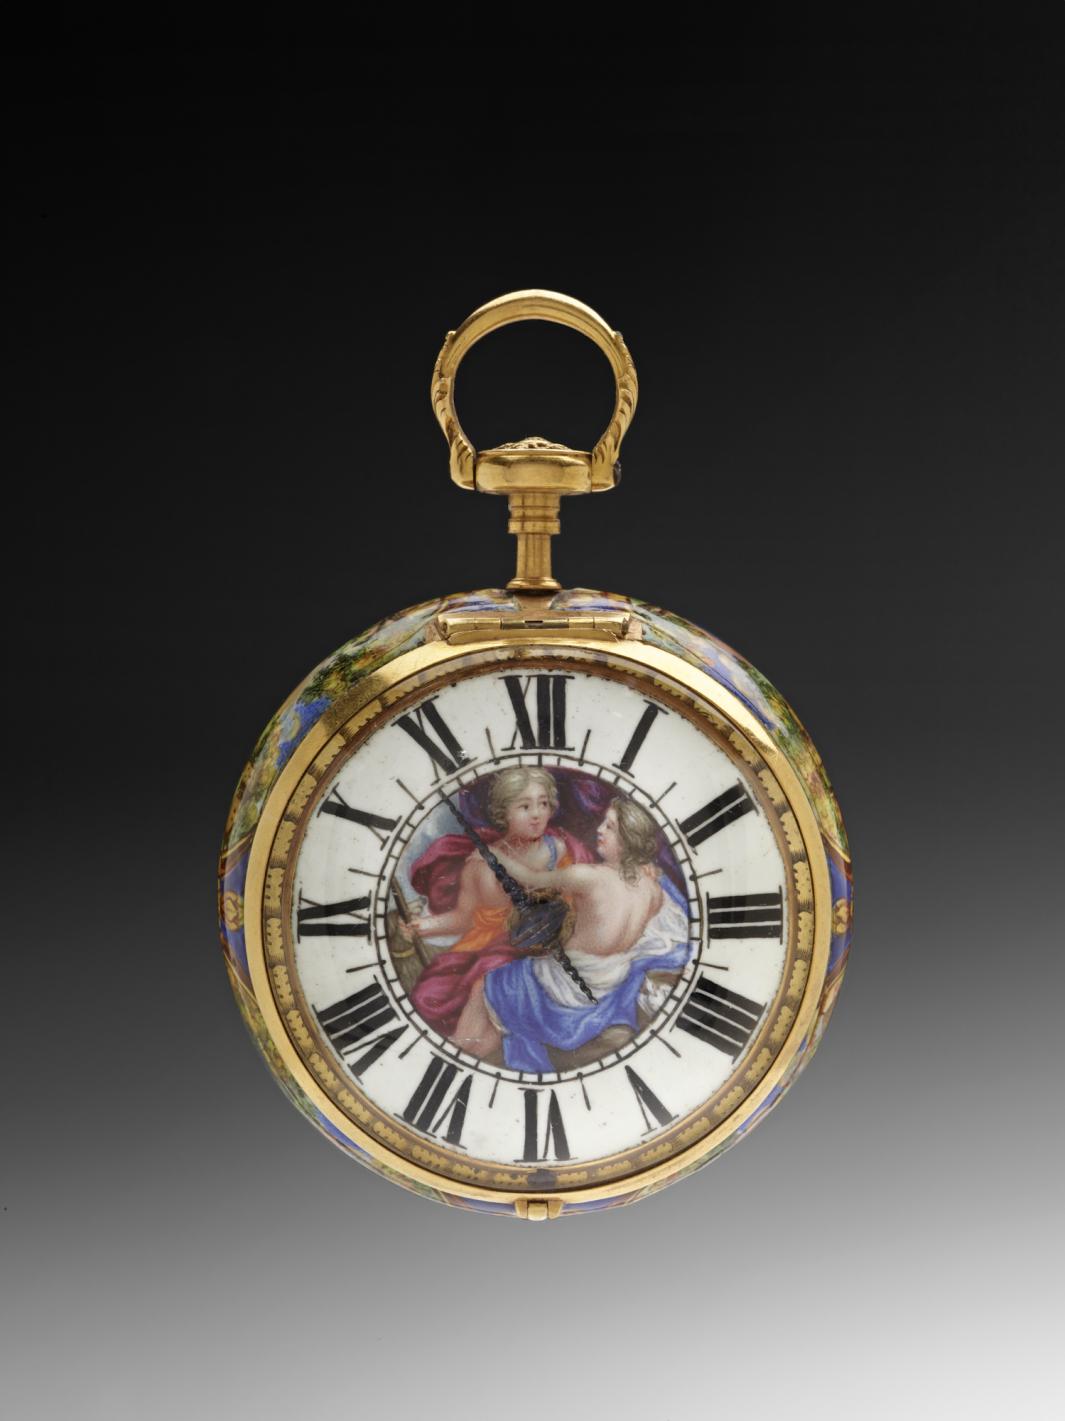 gold and enamel pendant watch with white face and depiction of man and woman in each other's arms at center